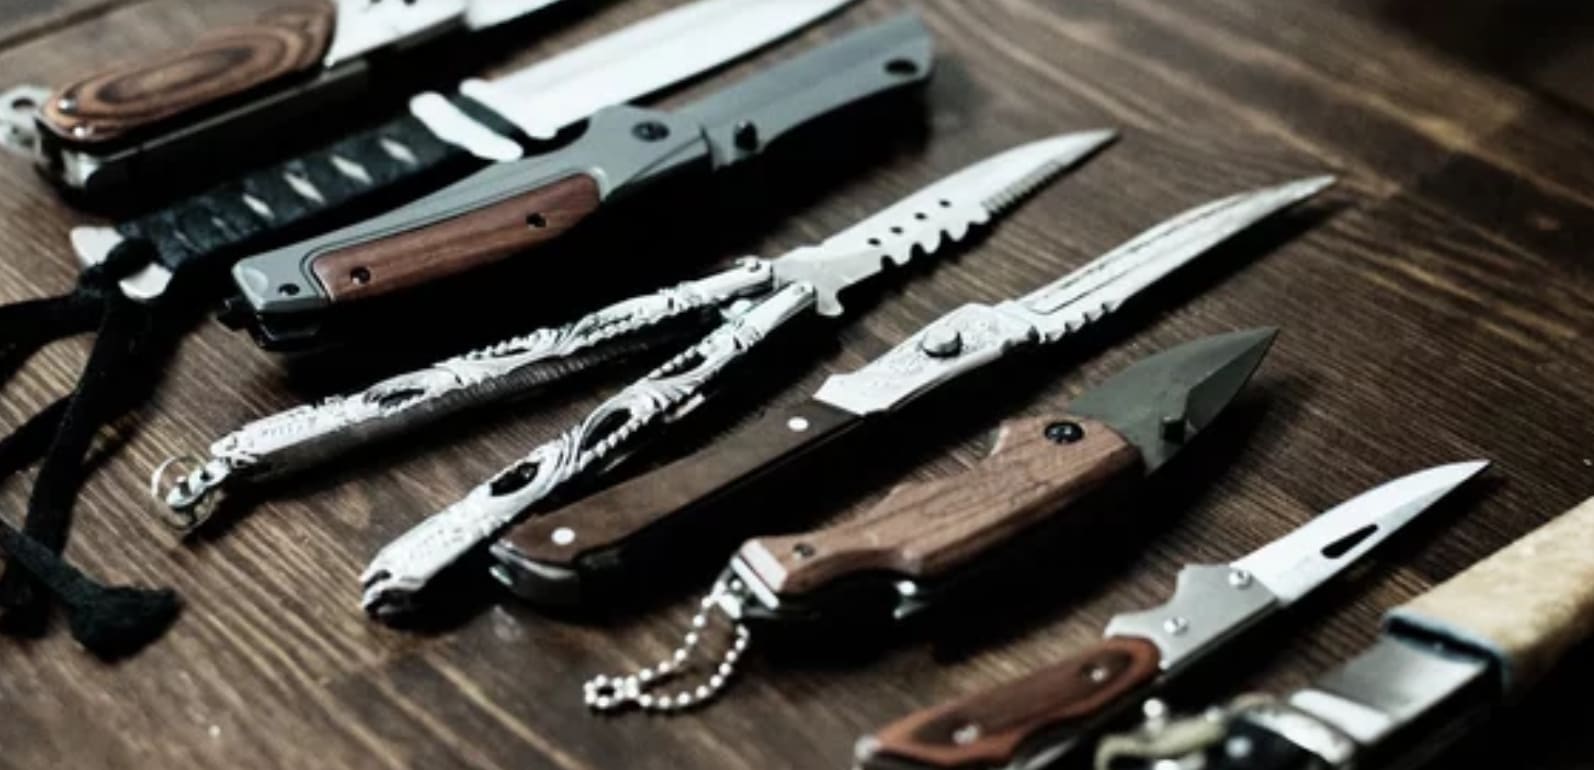 A series of pocket knives put side by side on a wooden table